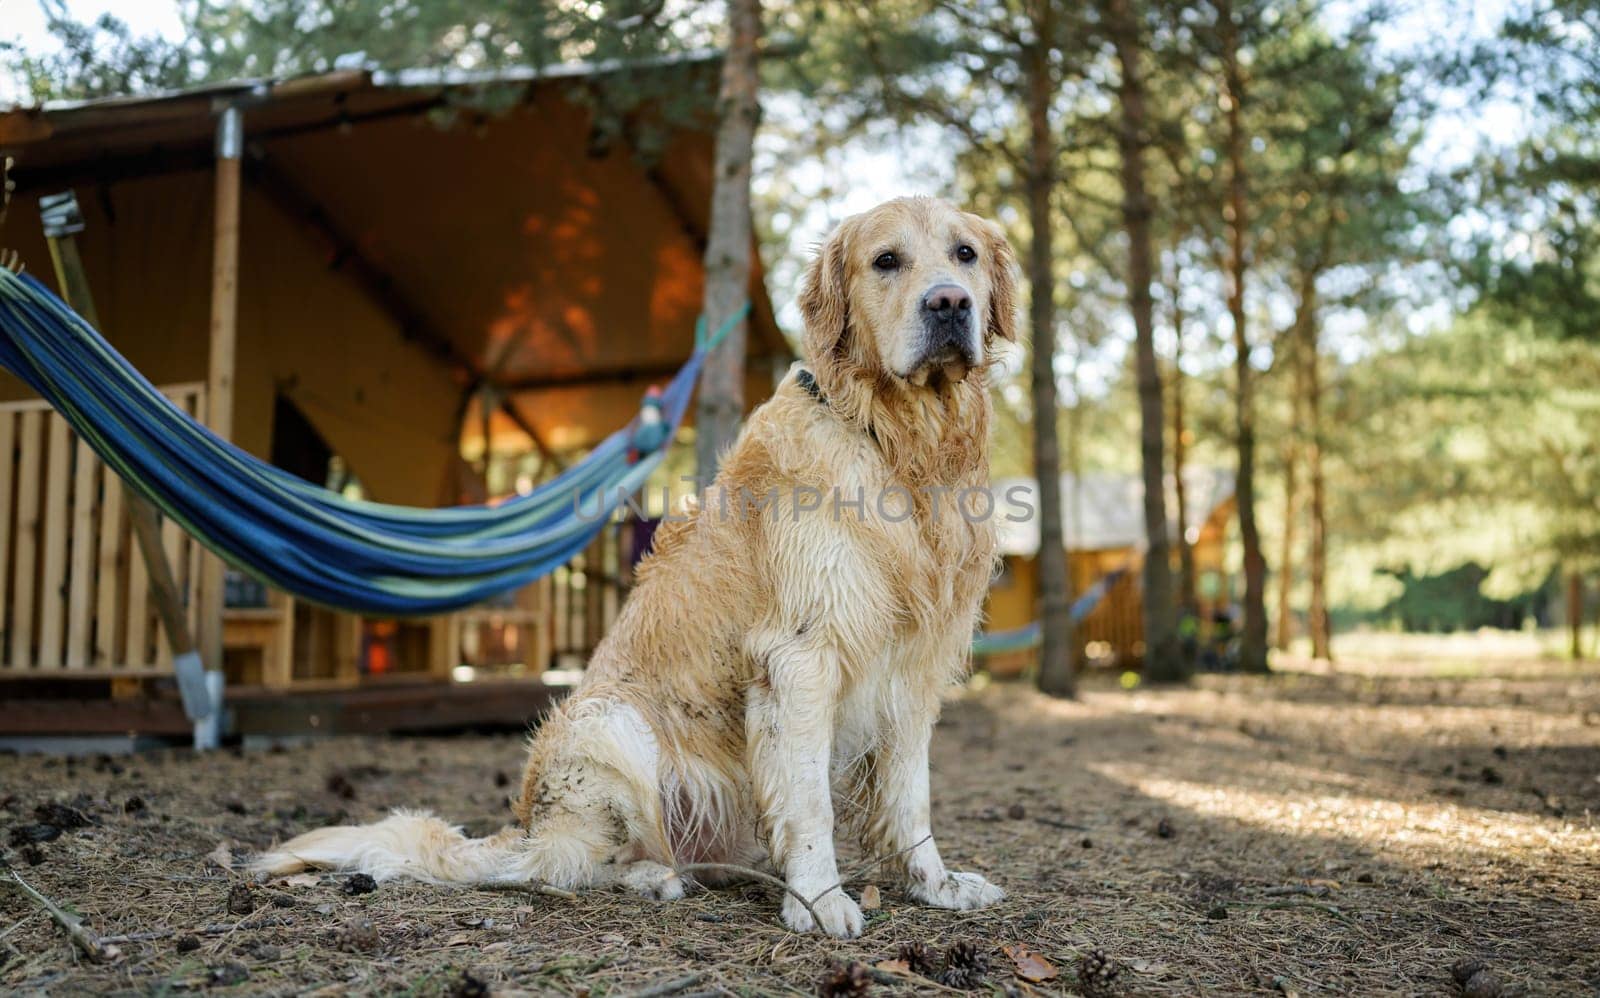 Cute Wet Golden Retriever Dog Outdoors Near The Wooden Camping House And Hummock